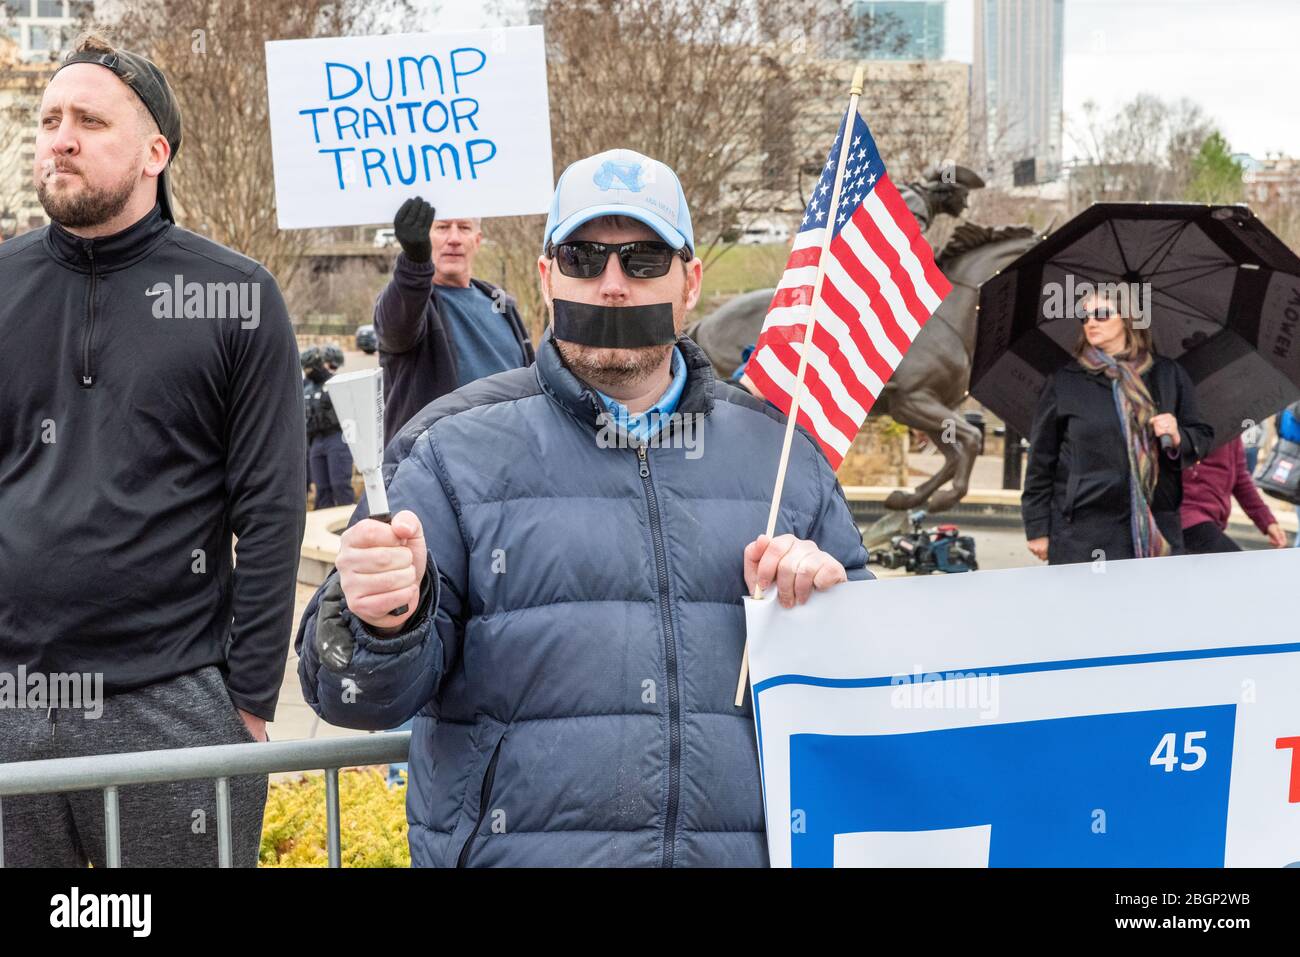 CHARLOTTE, NORTH CAROLINA/USA - February 7, 2020: Trump protester awaits the President's visit in Charlotte, North Carolina on February 7, 2020 Stock Photo